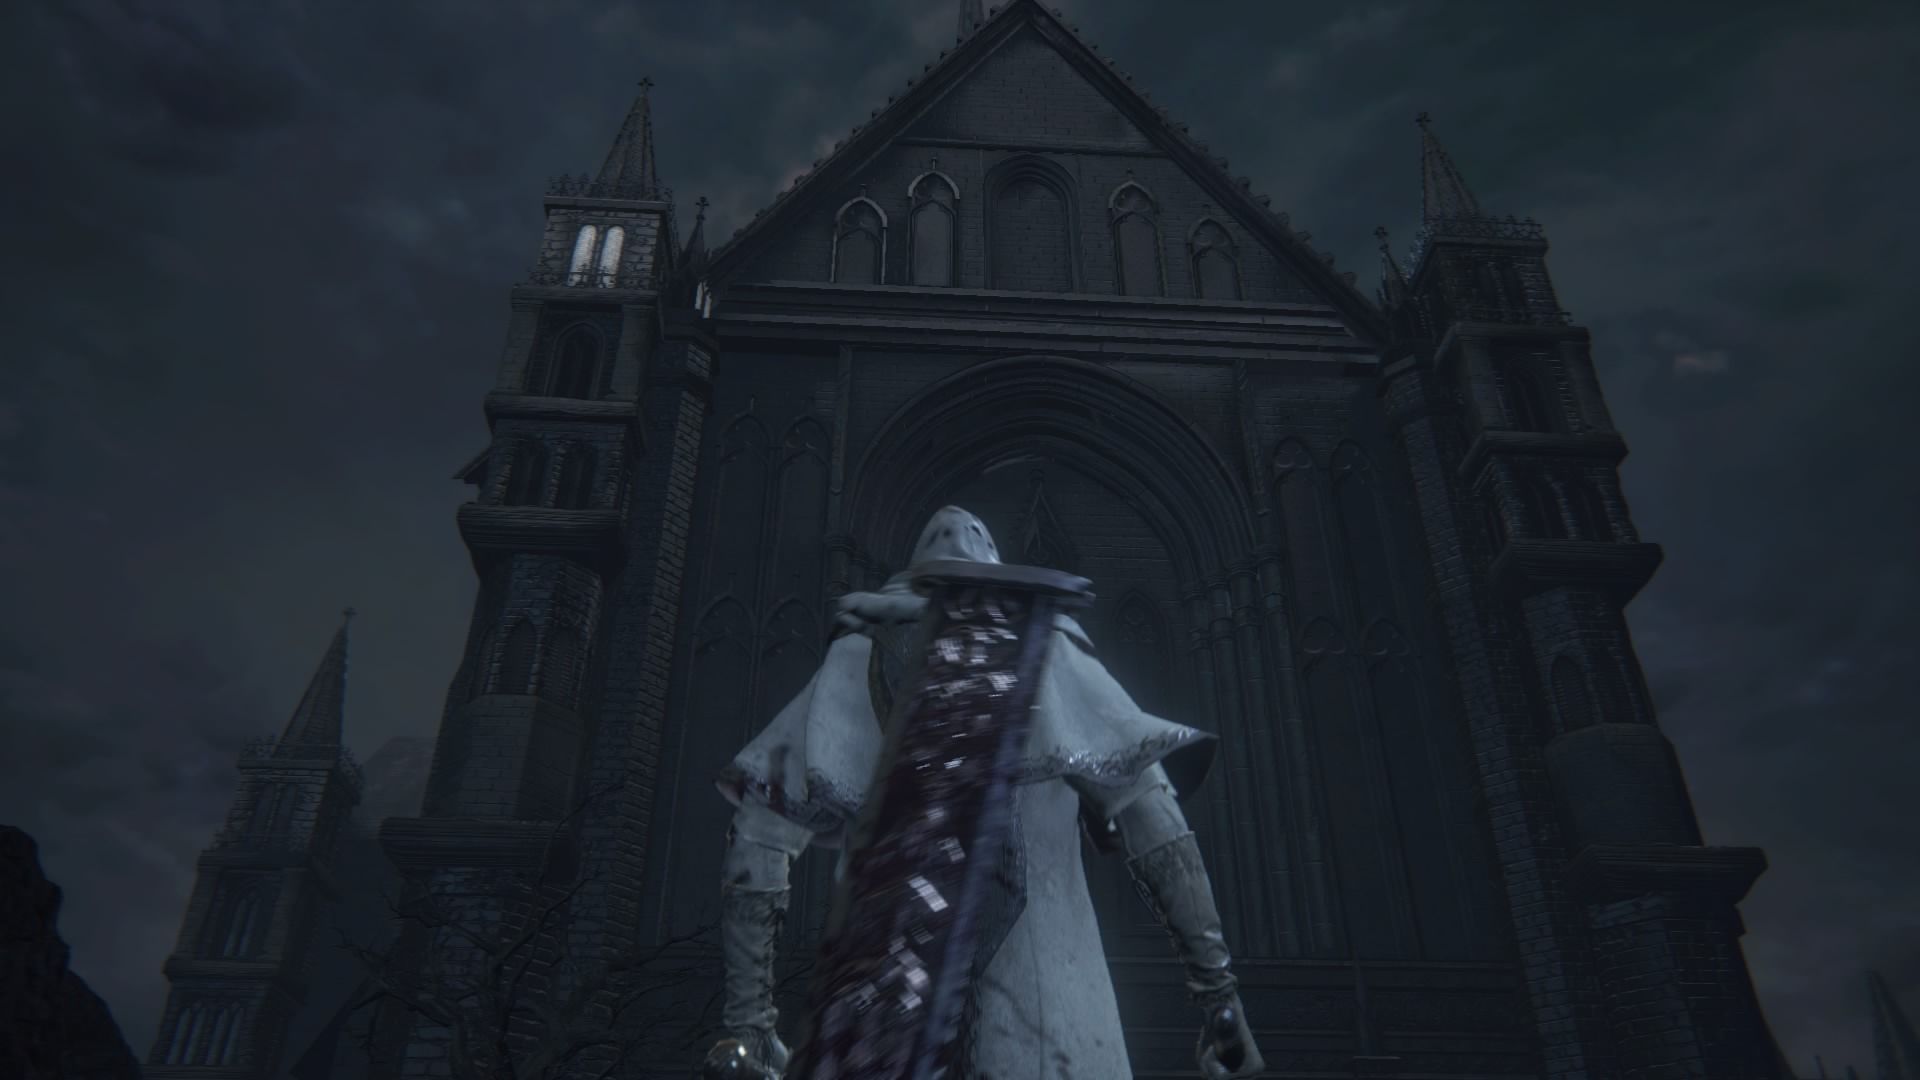 bloodborne character build guide